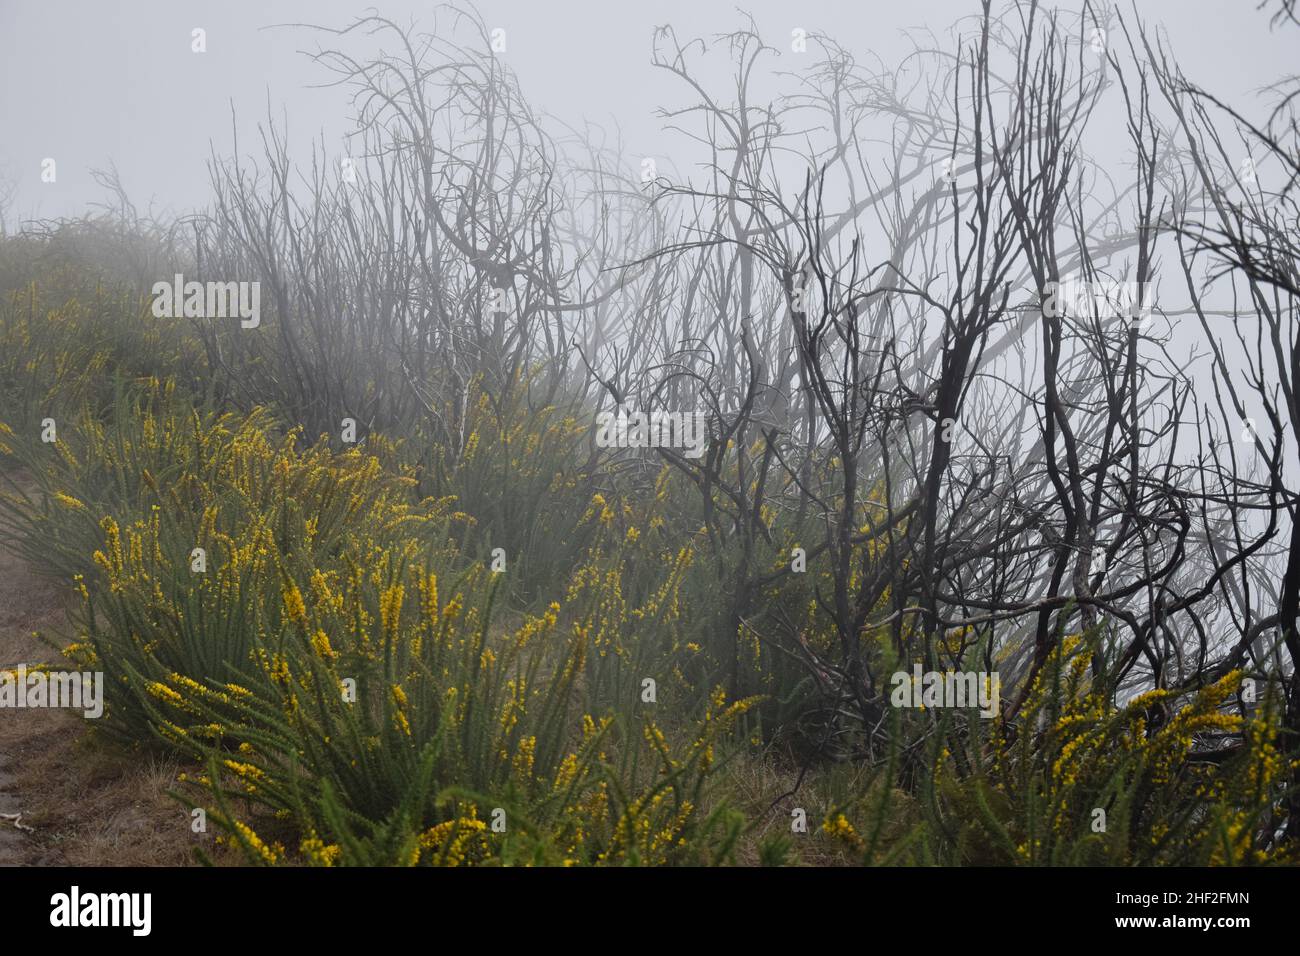 bushes broom on a fogy misty morning madeira Stock Photo